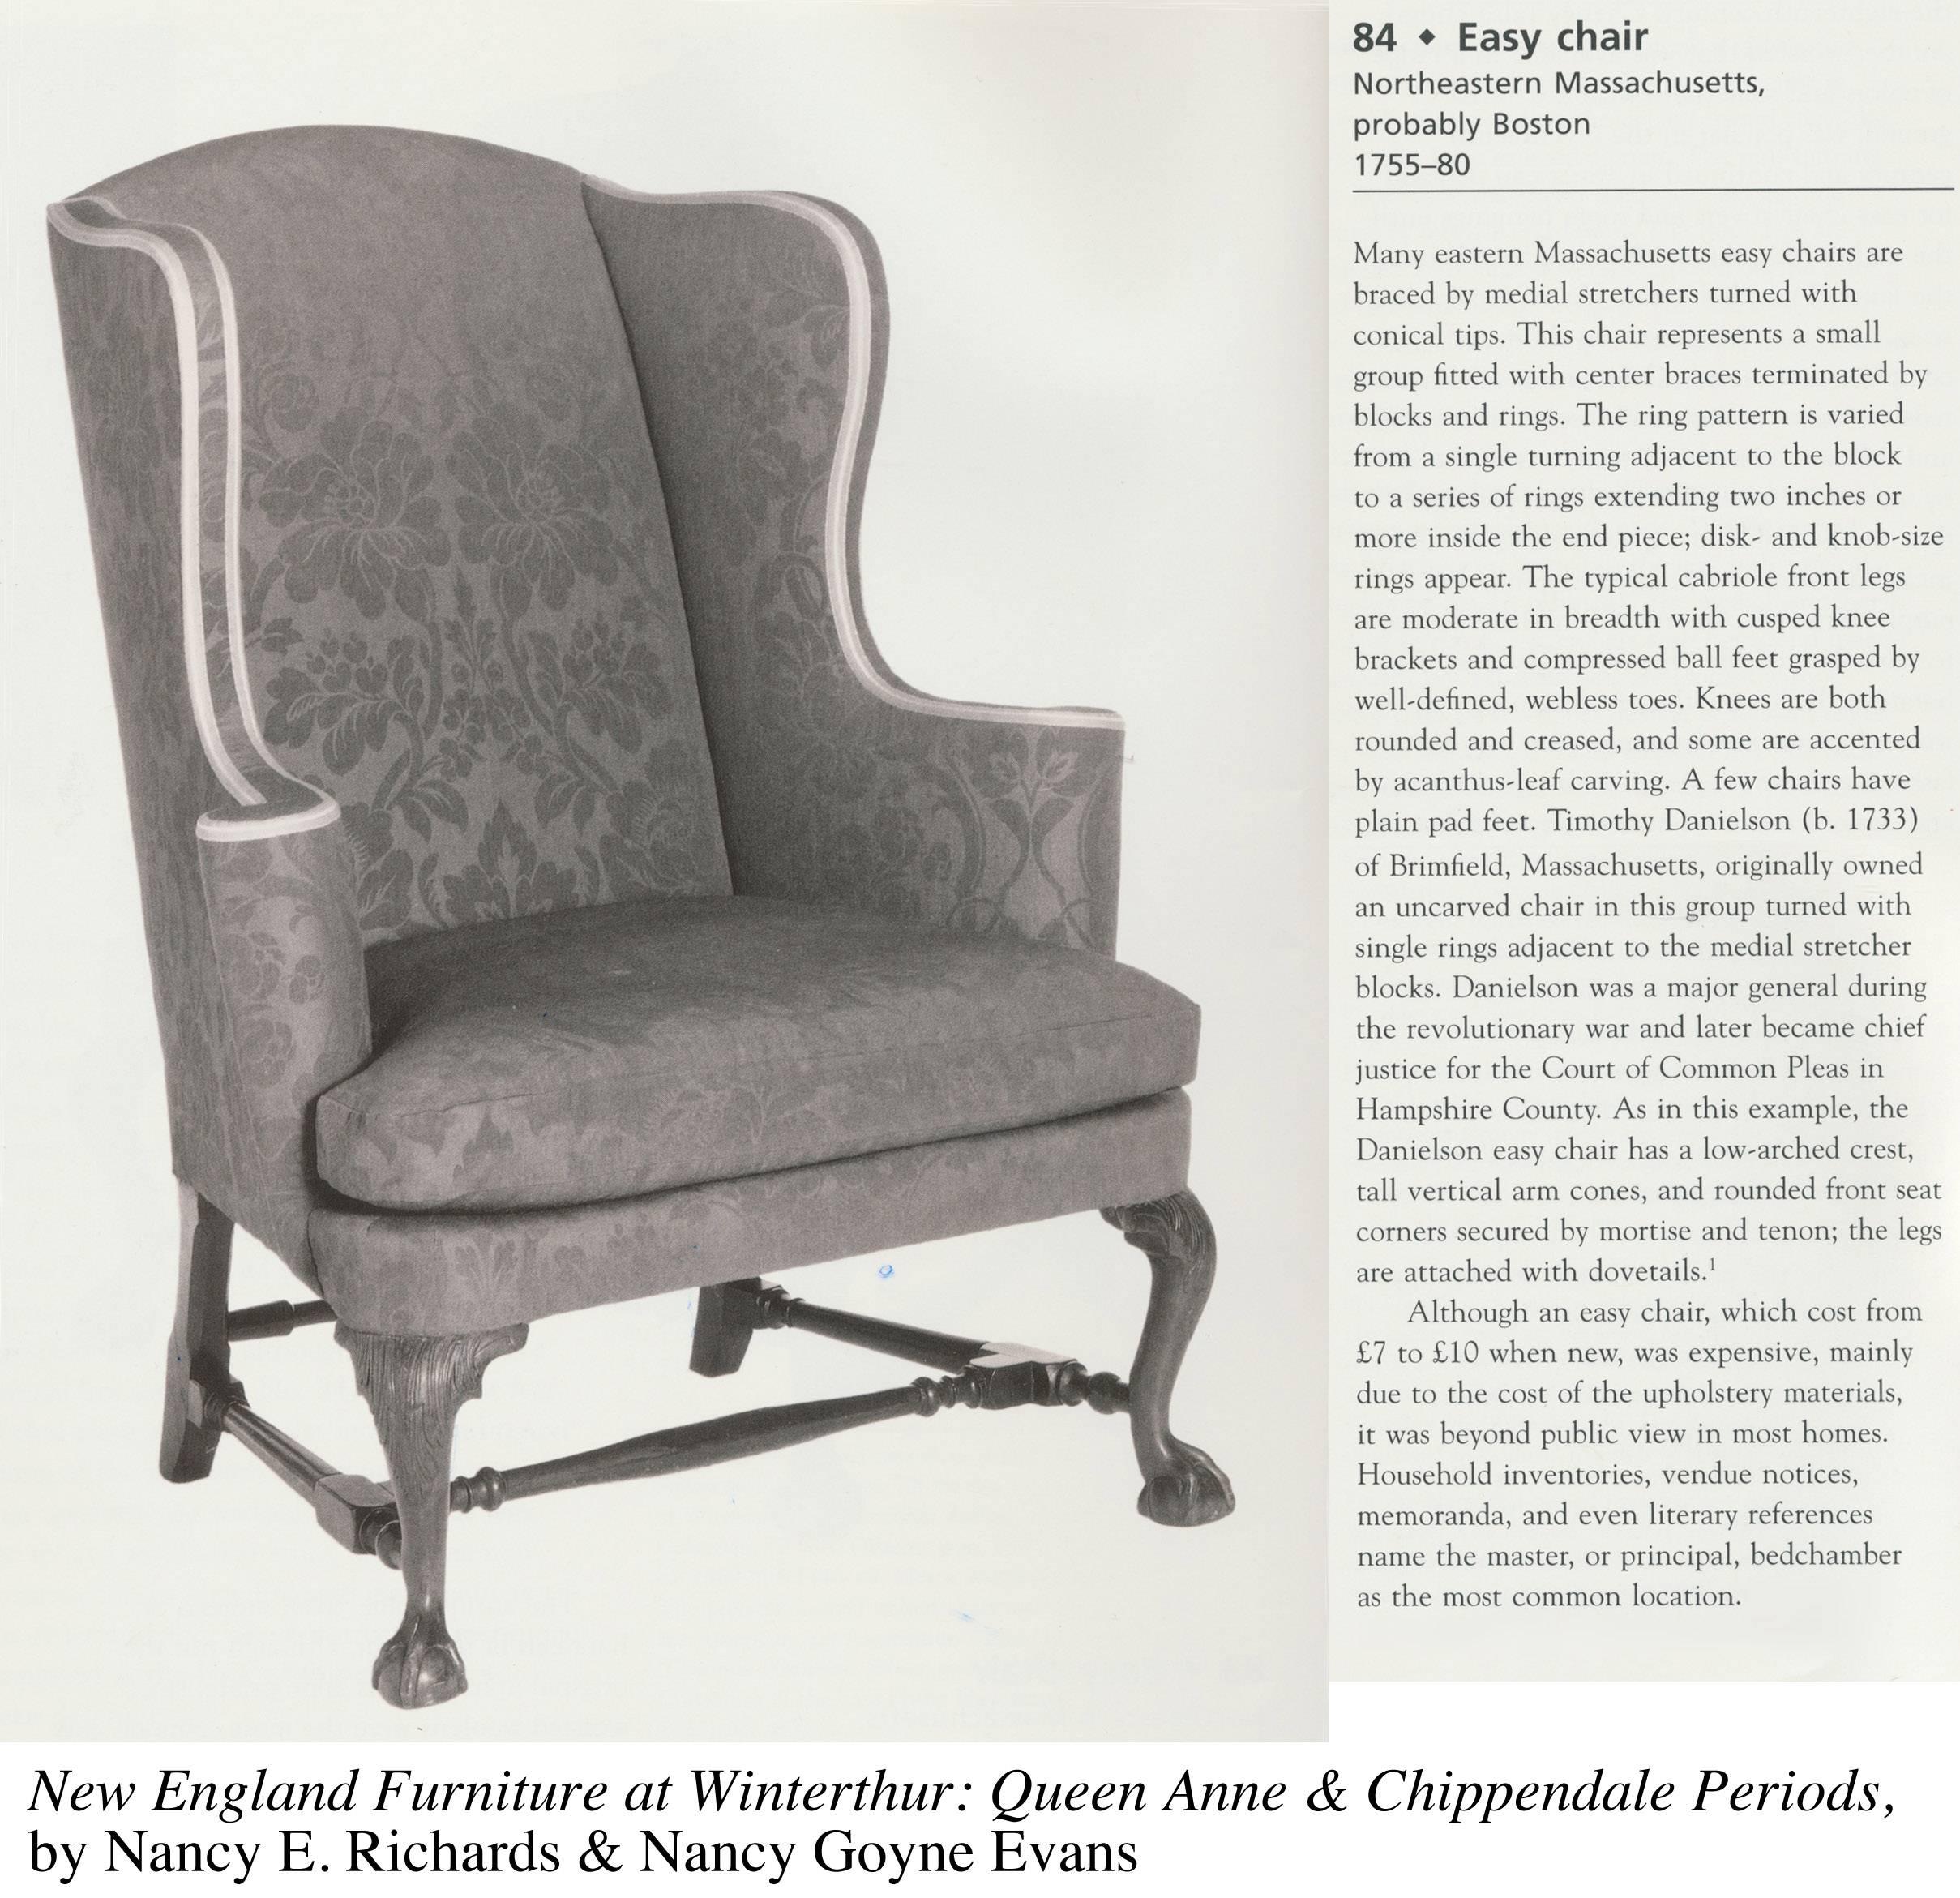 Upholstered Wing Chair with Carved Knees and Claw and Ball Feet, Boston 1